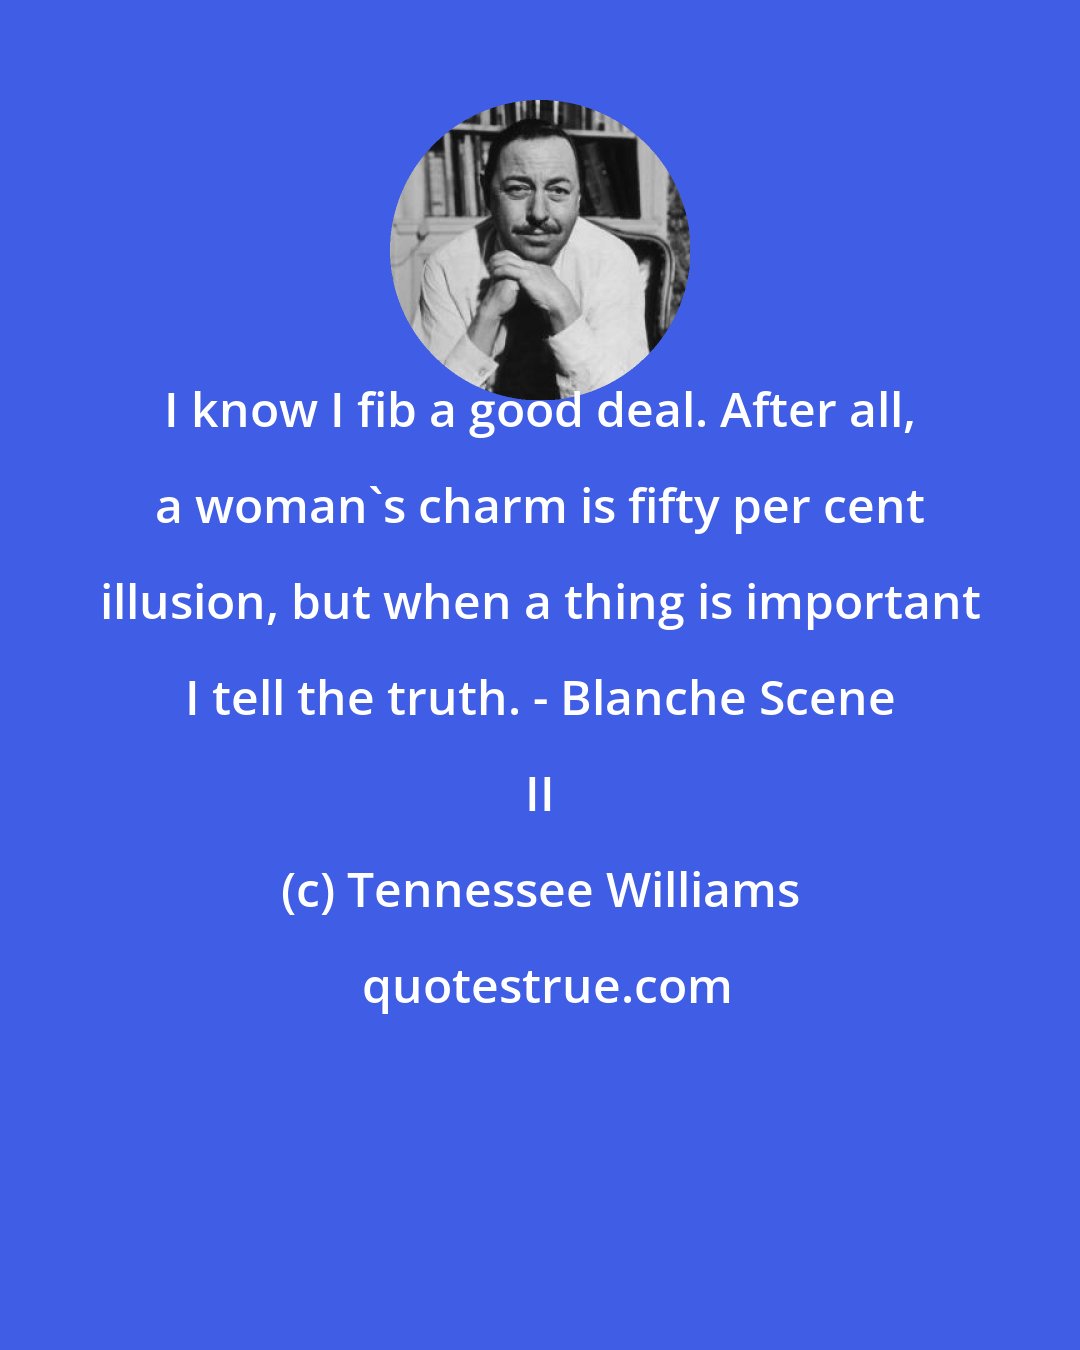 Tennessee Williams: I know I fib a good deal. After all, a woman's charm is fifty per cent illusion, but when a thing is important I tell the truth. - Blanche Scene II